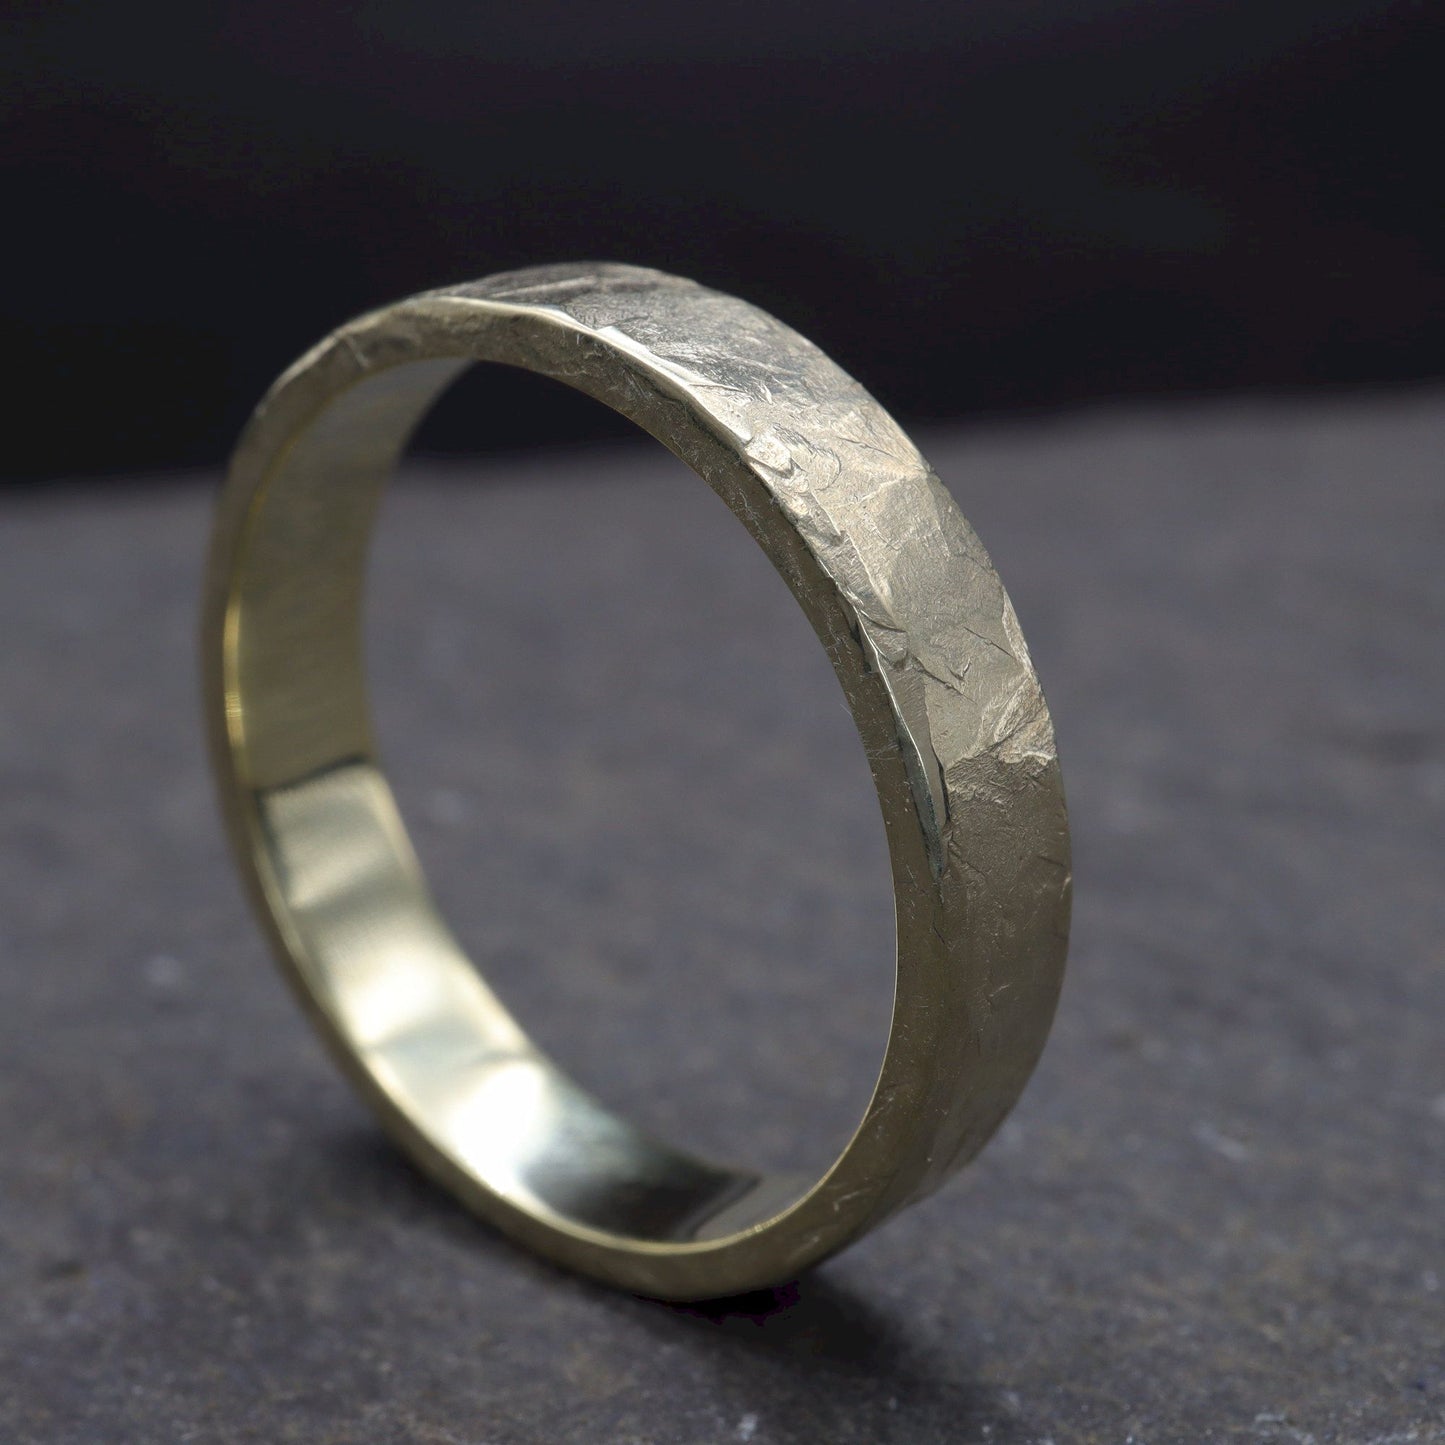 Yellow gold thin wedding ring - rustic flat hammered textured band - Windermere design.